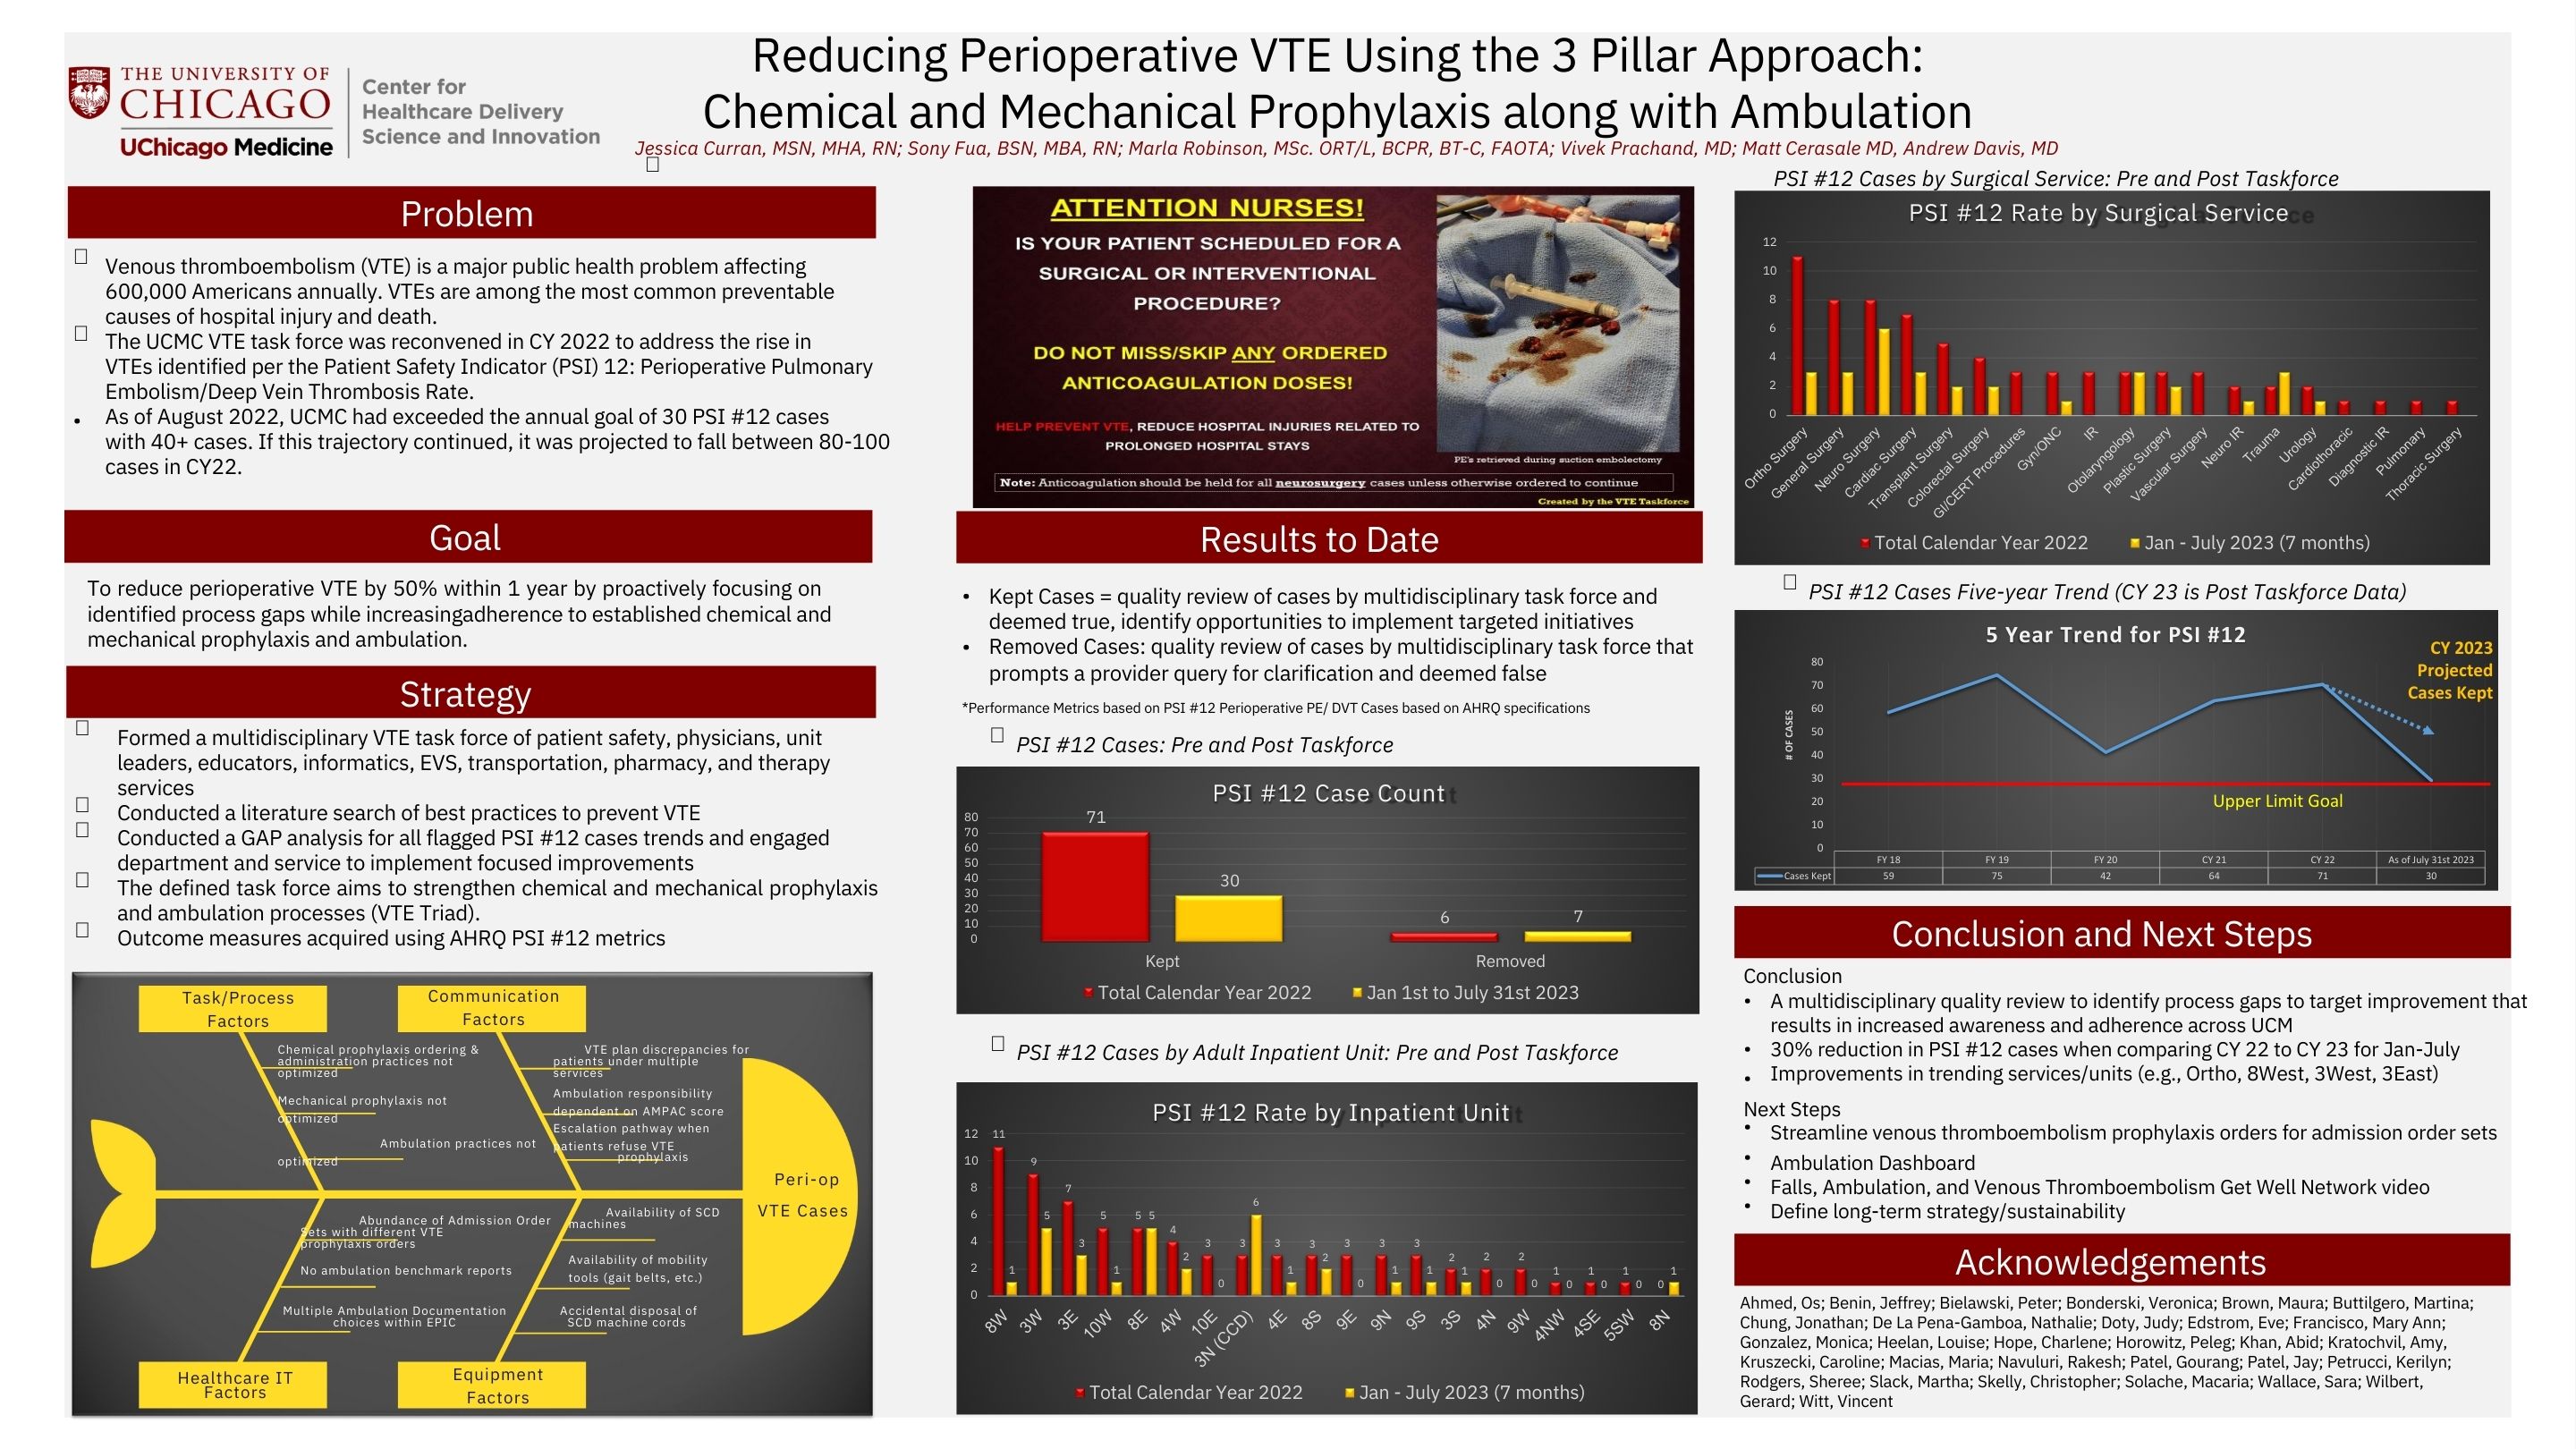 CURRAN_Reducing Perioperative VTE Using the 3 Pillar Approach